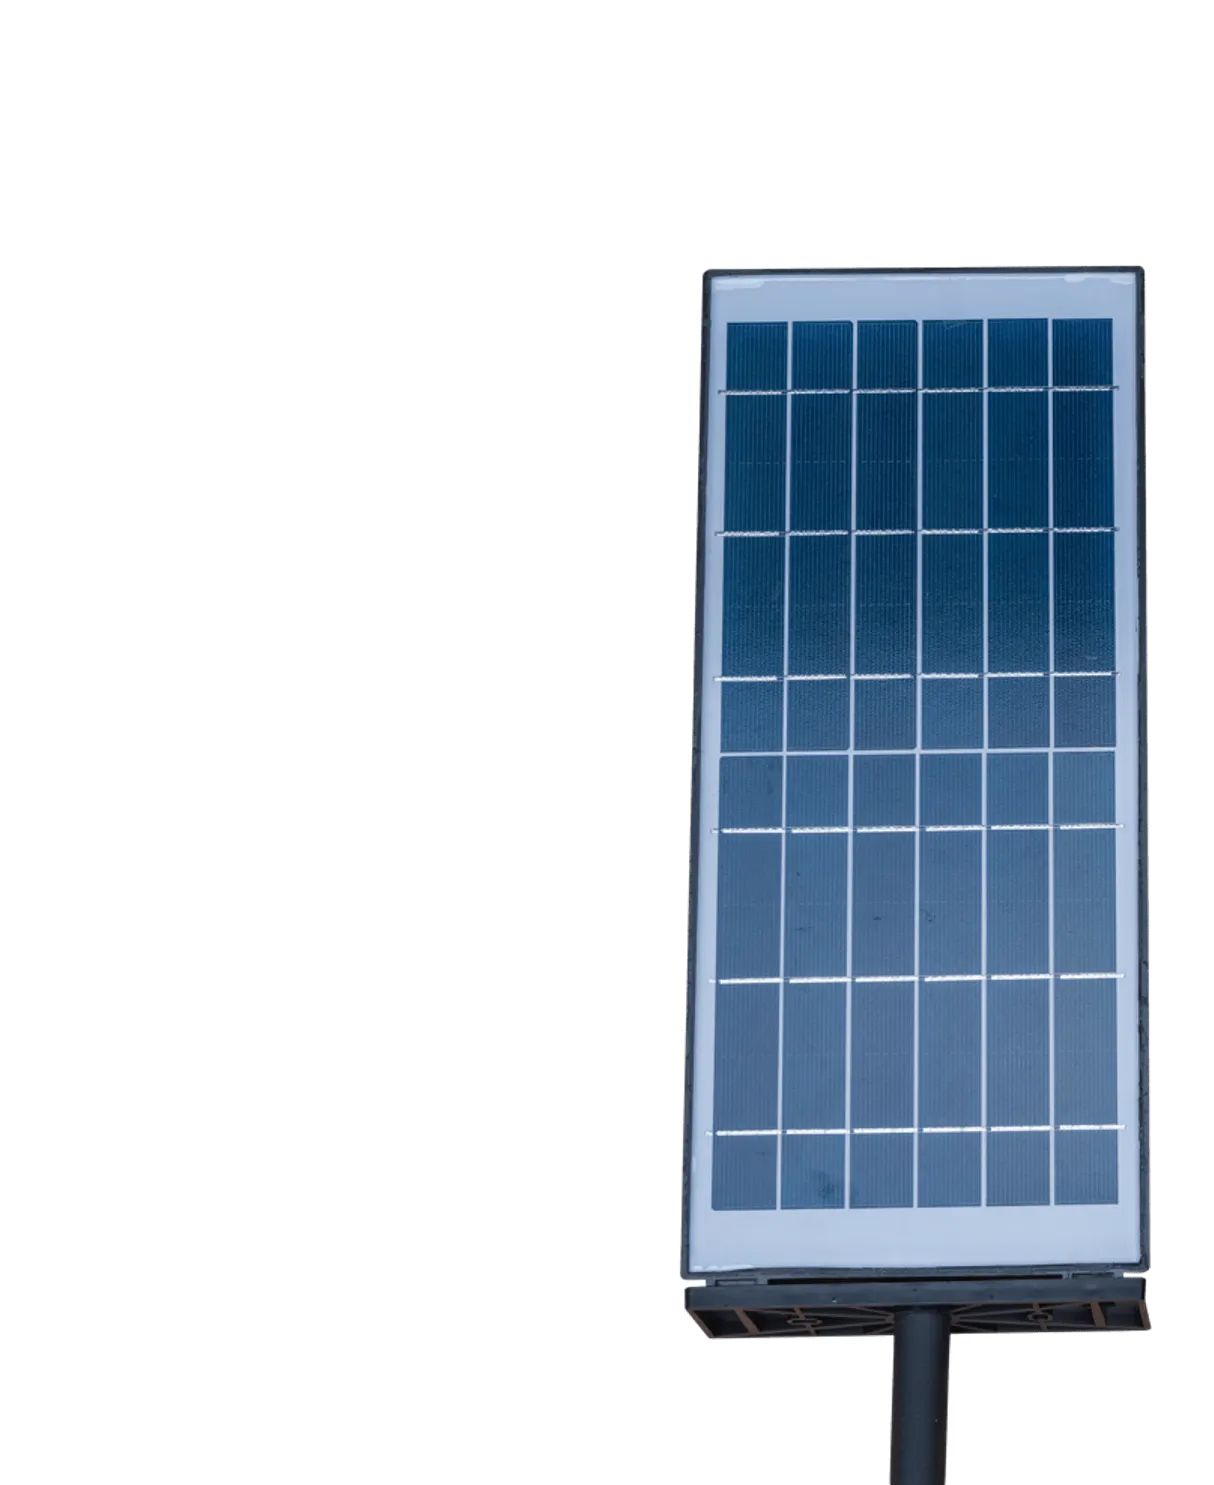 Solar panel and K amplifier